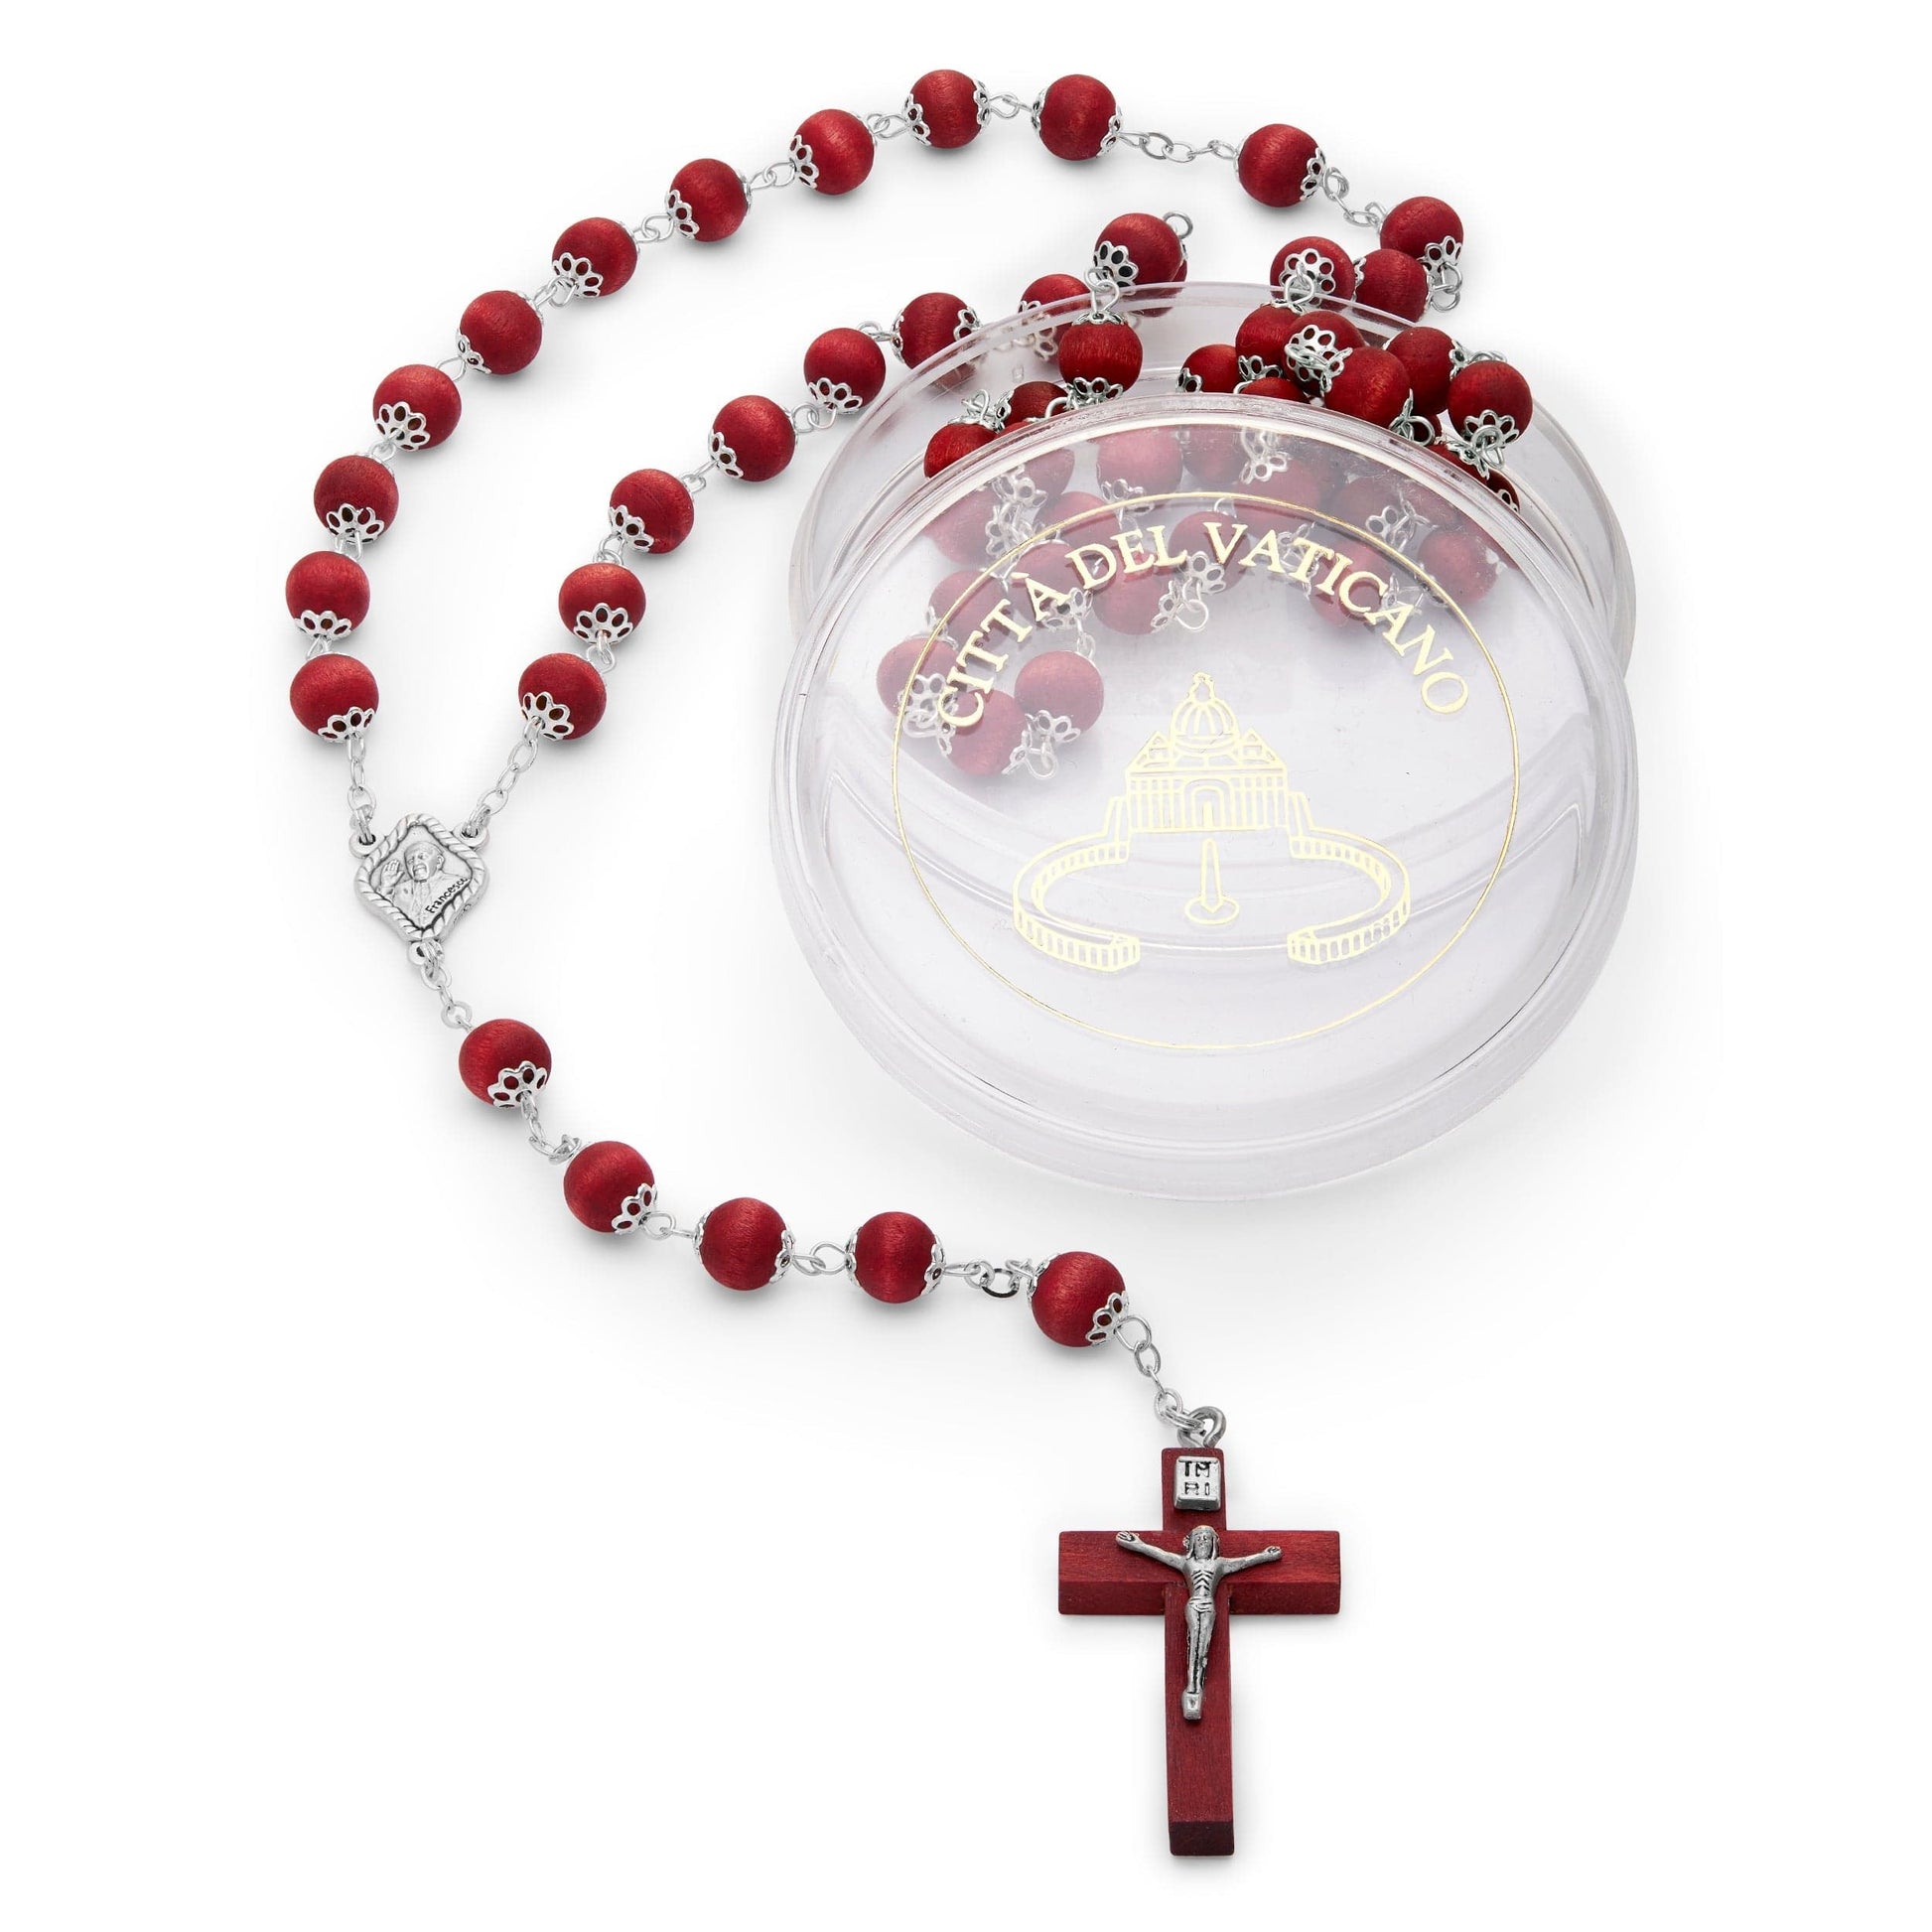 MONDO CATTOLICO Prayer Beads 63 cm (28.8 in) / 8 mm (0.31 in) Capped Rose Petals Rosary Beads